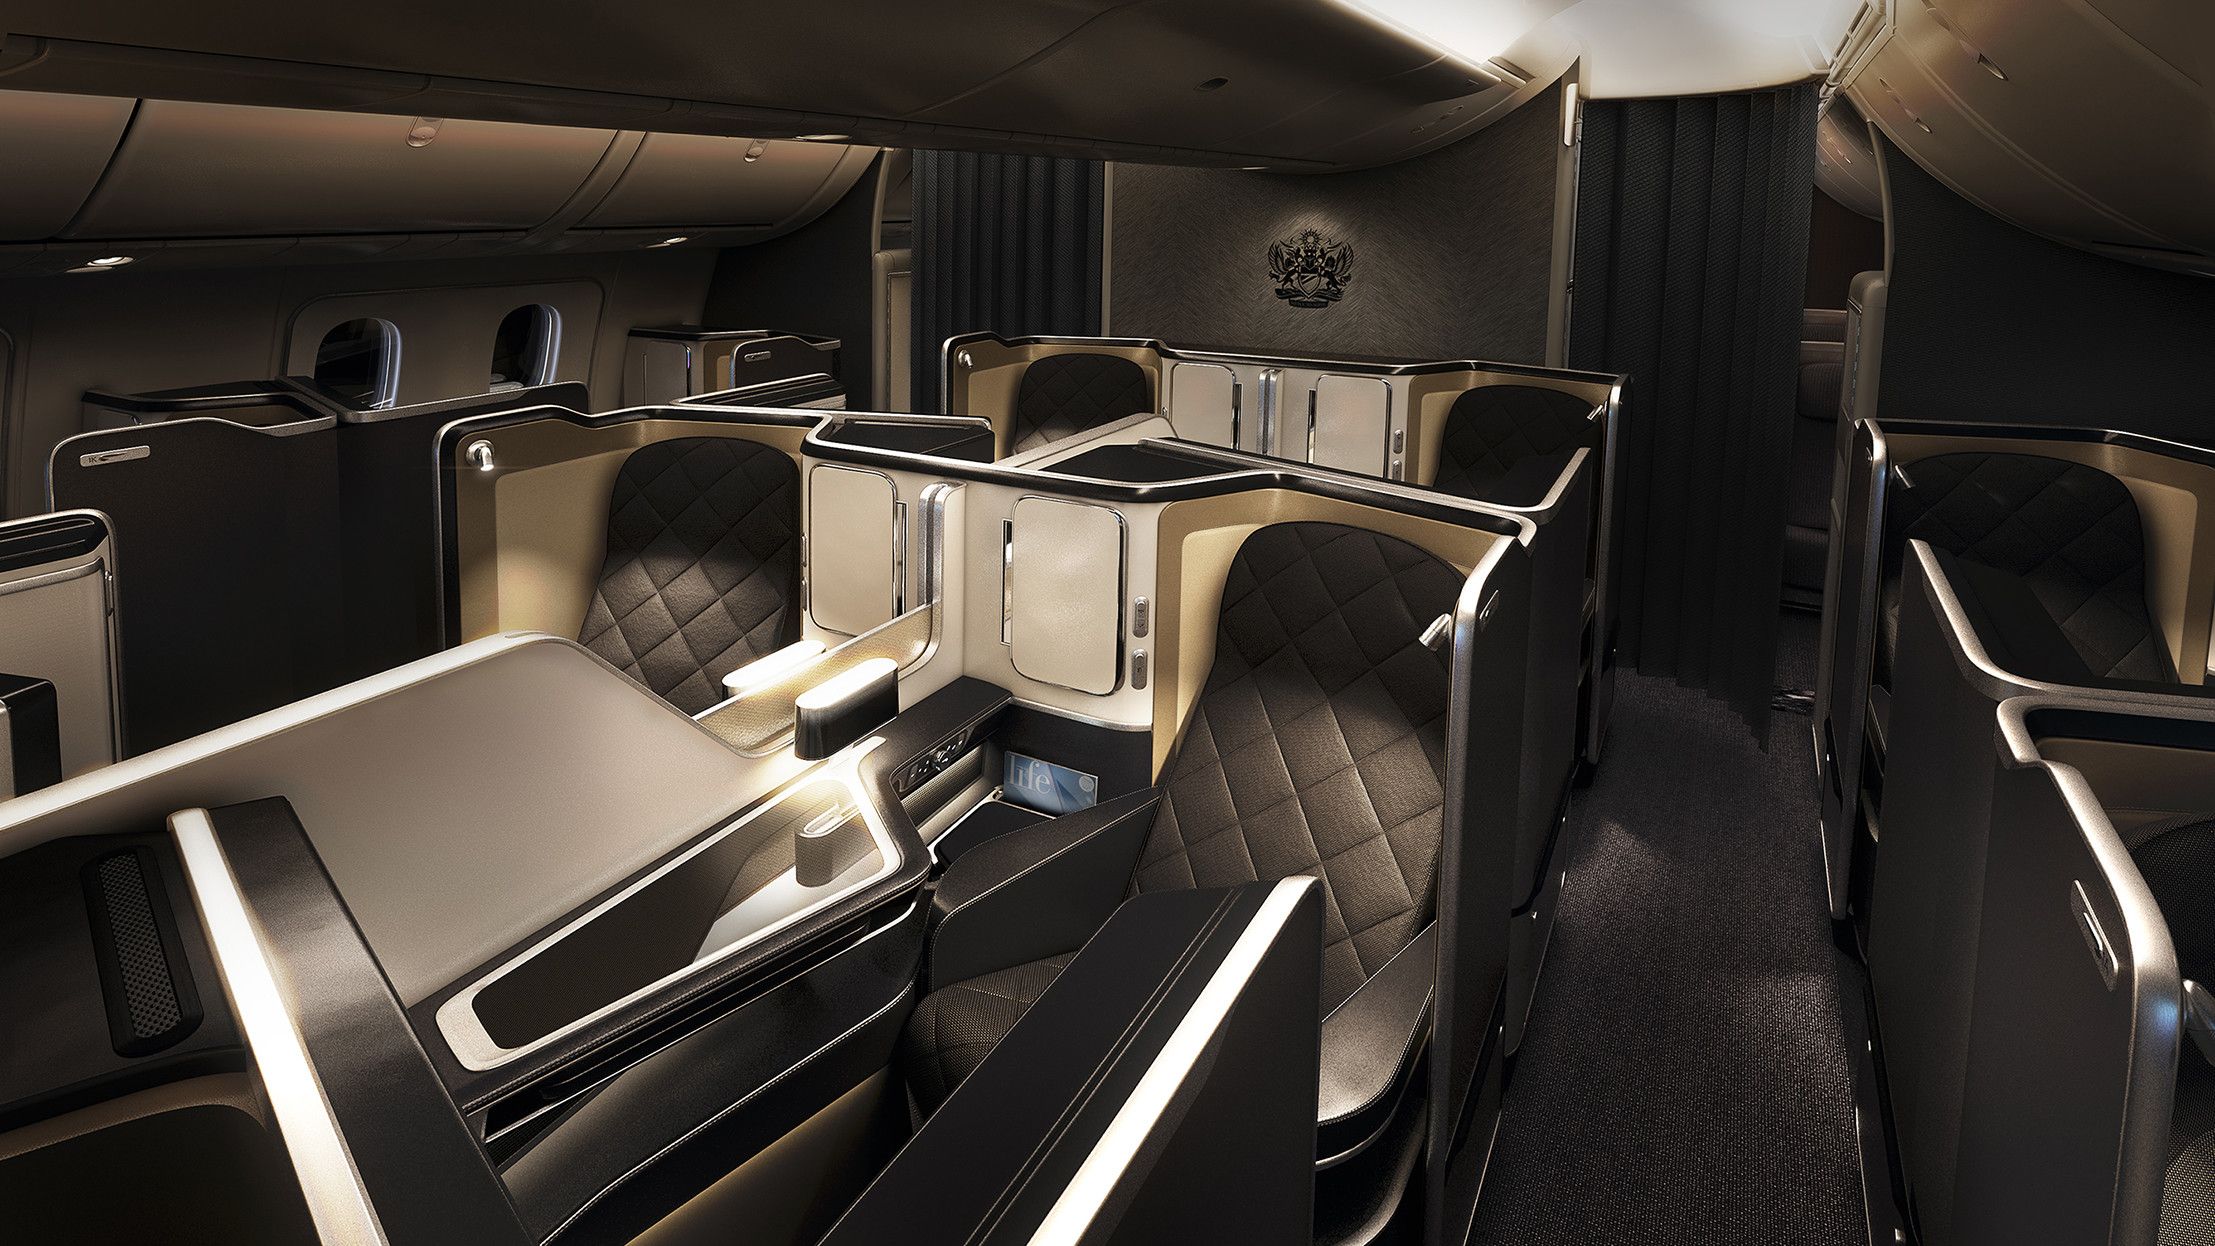 Inside the First Class Cabin of a British Airways Boeing 787.